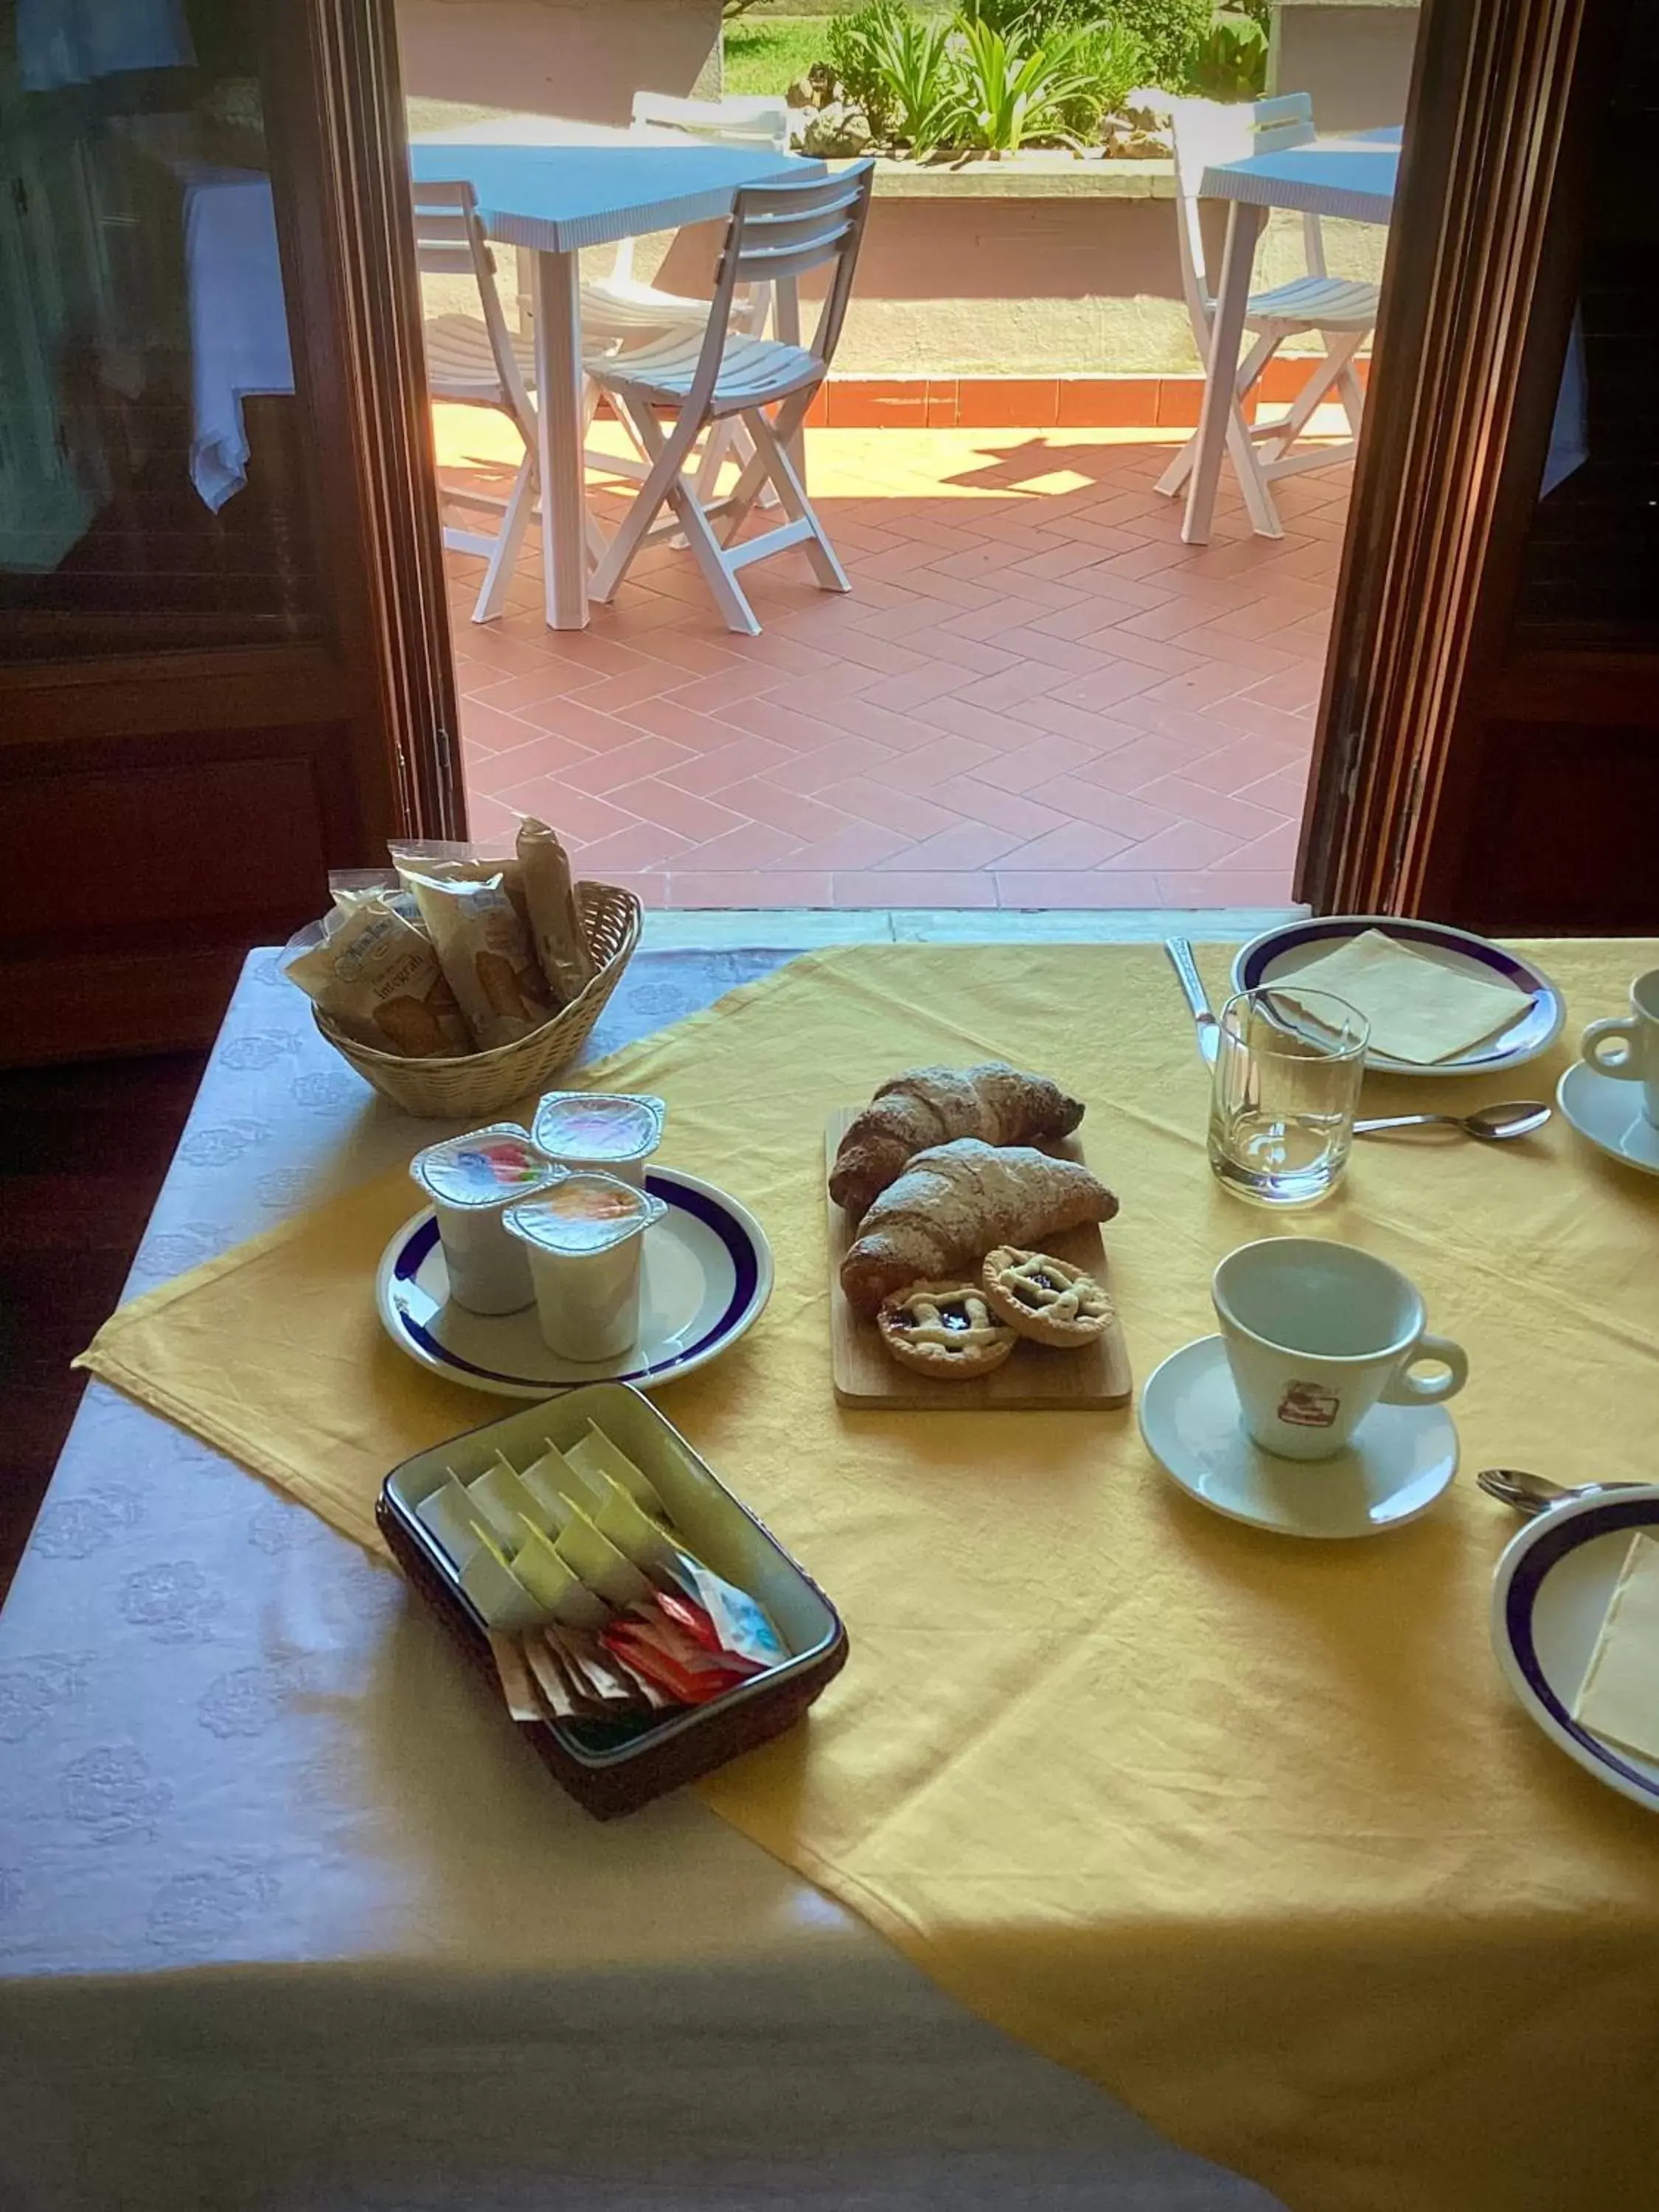 Food and drinks in Villa Orsini - A Retreat in Pisa - Food and Relax